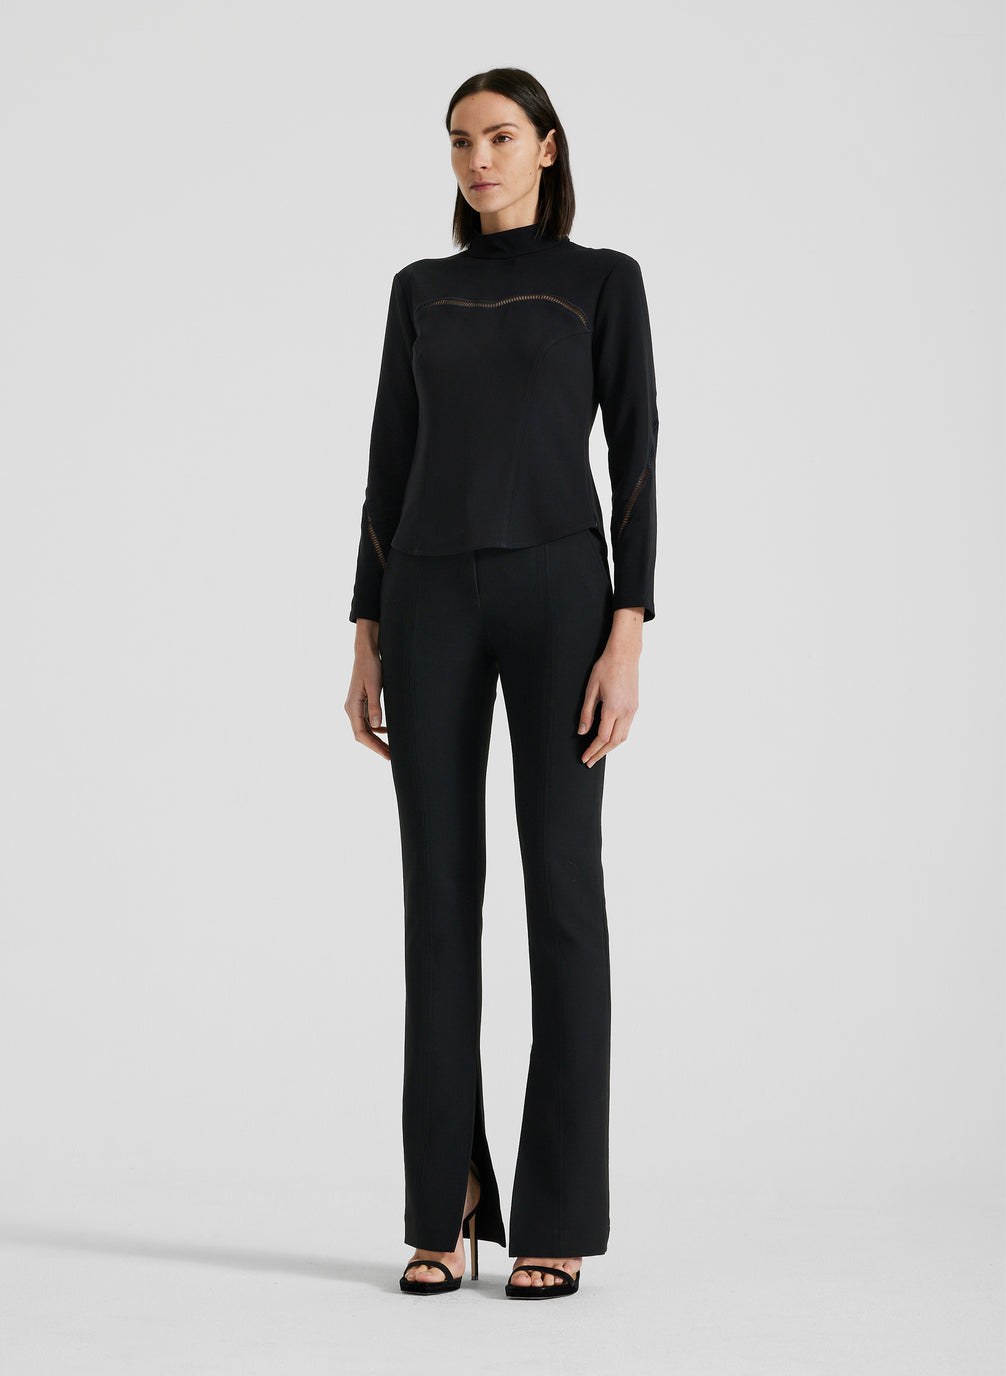 side view of woman wearing black long sleeve shirt and black pants